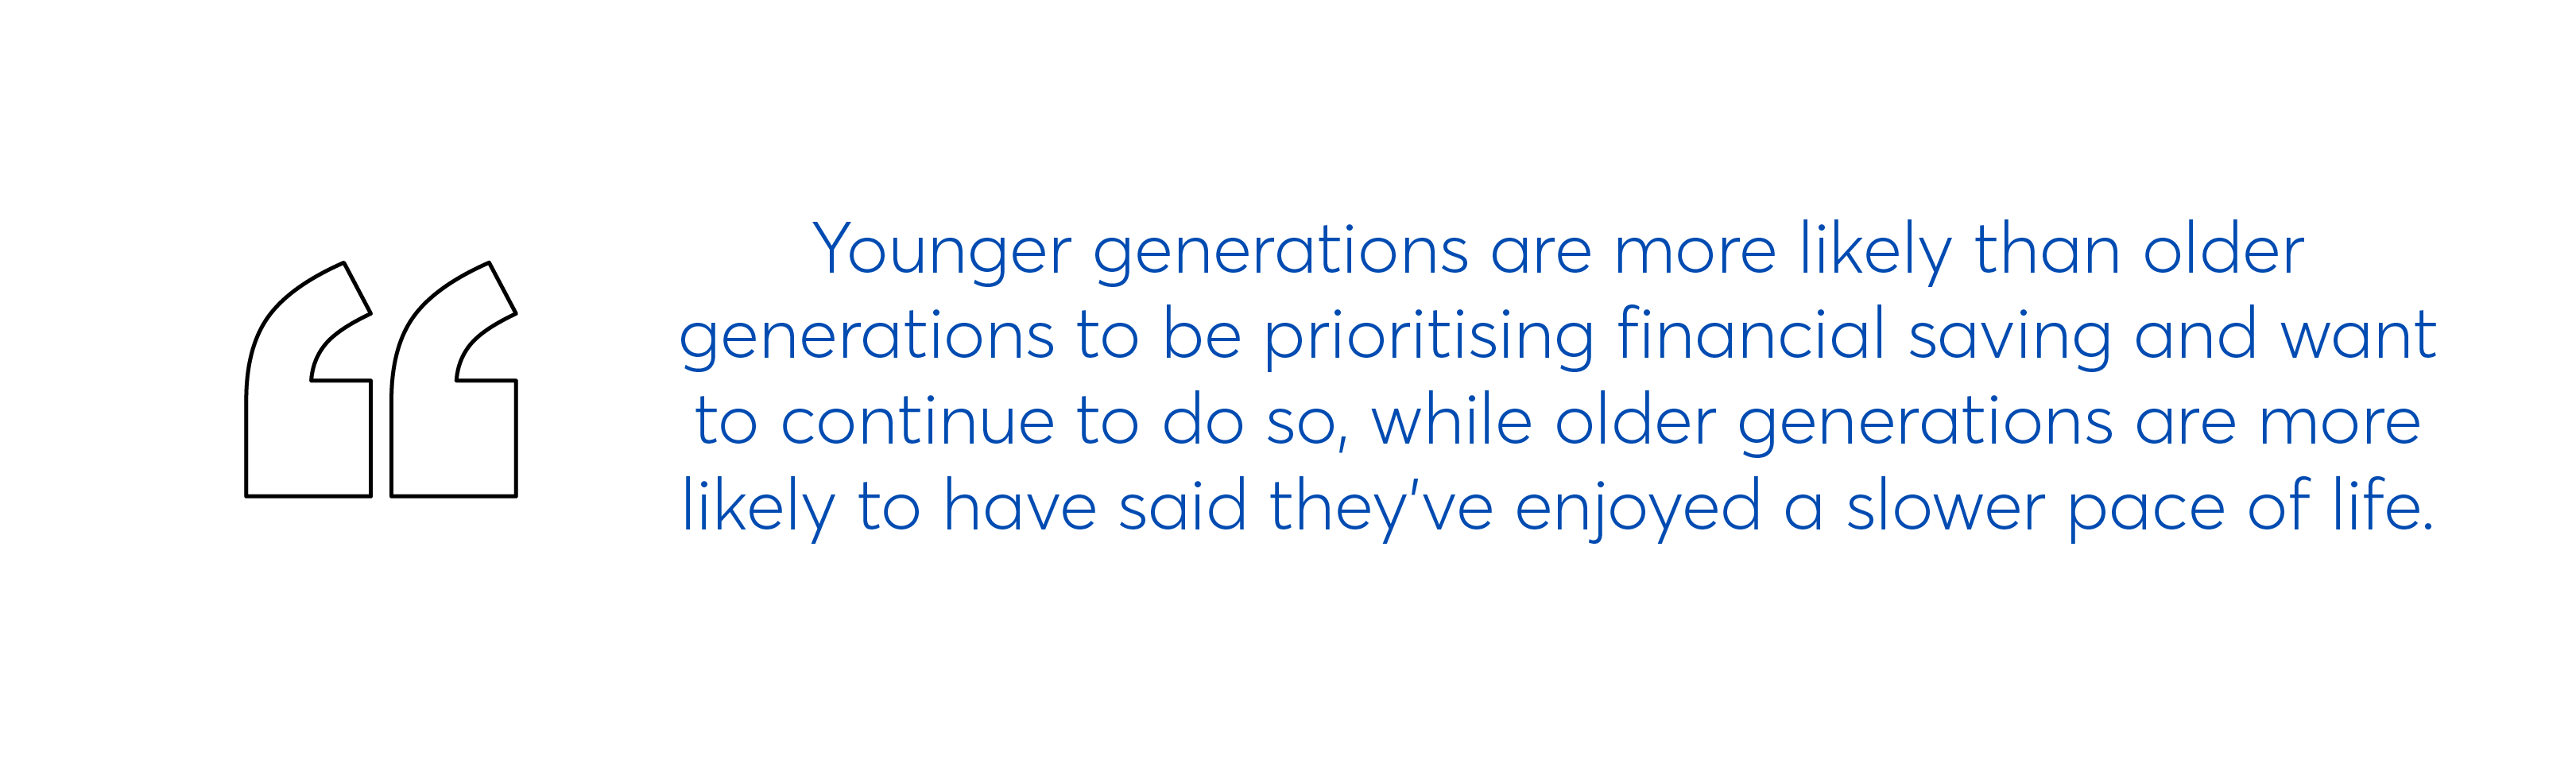 Younger generations are prioritising financial saving